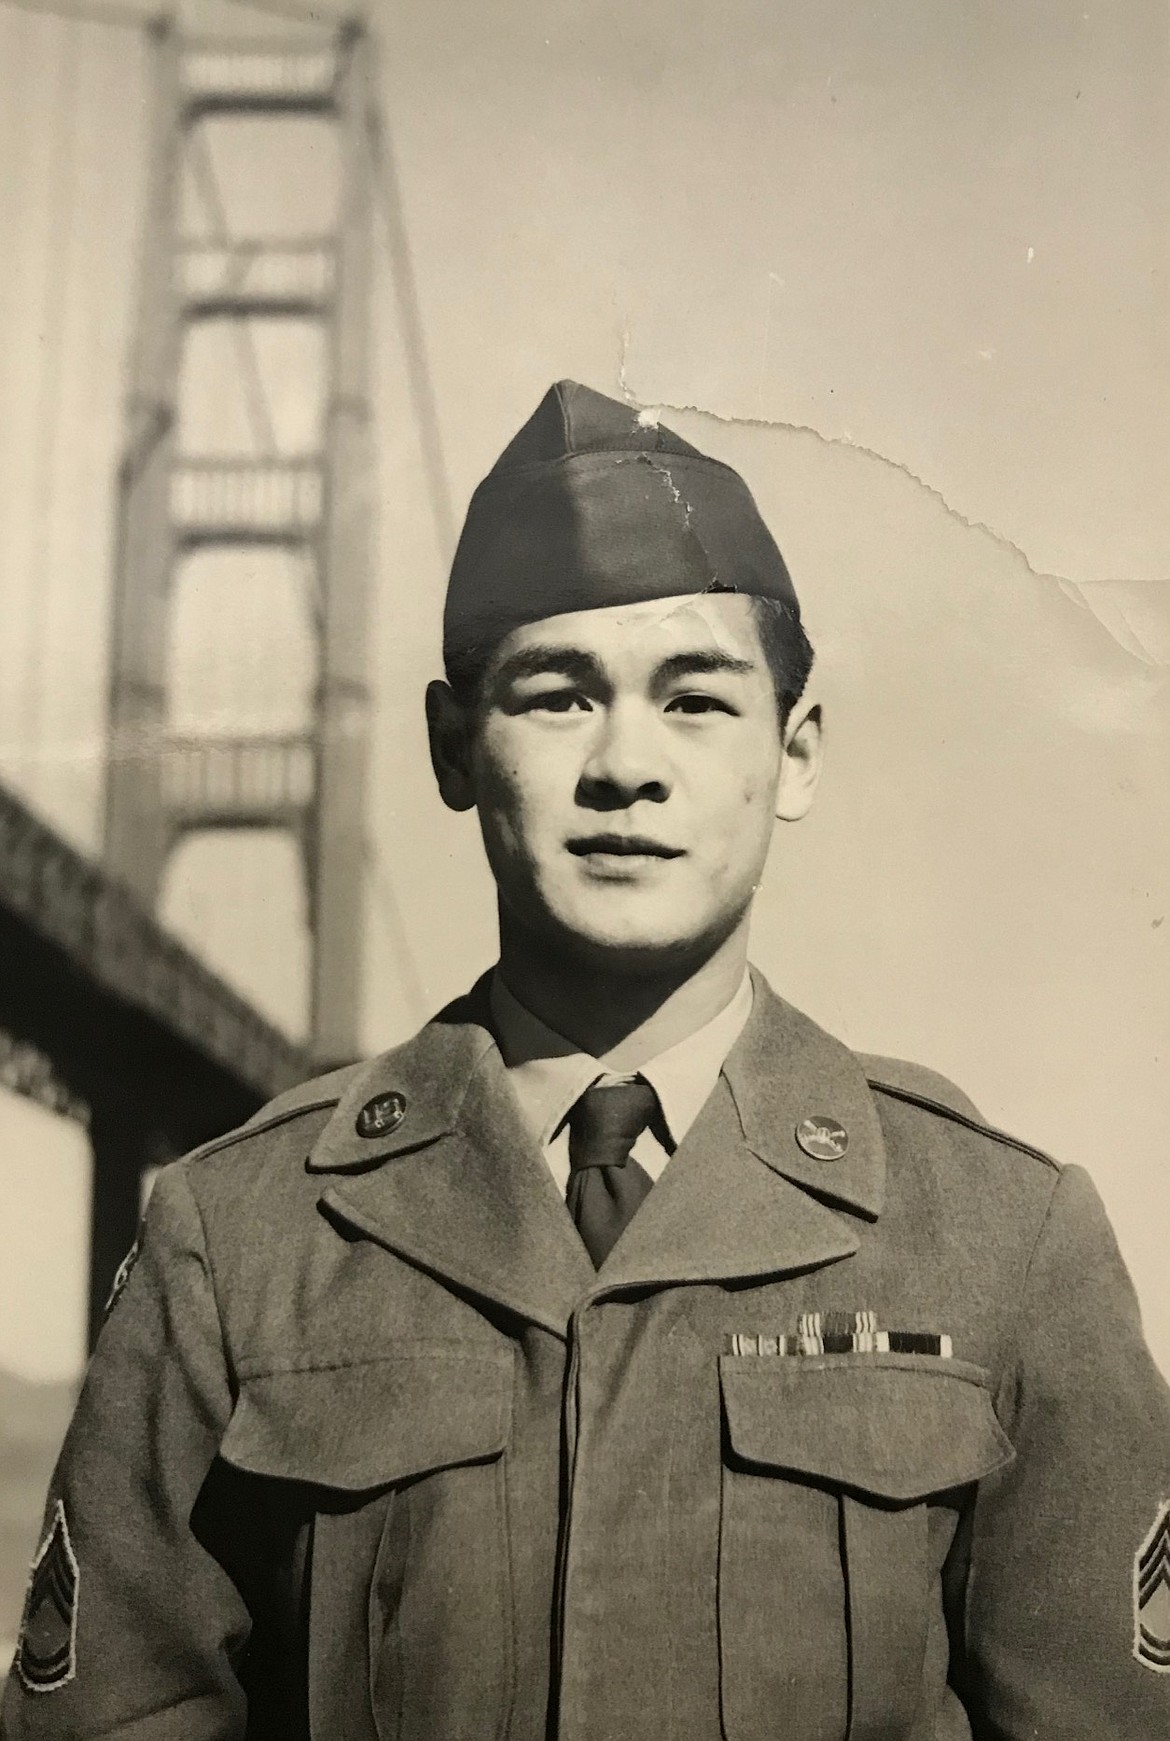 George Dong is pictured during his military service.